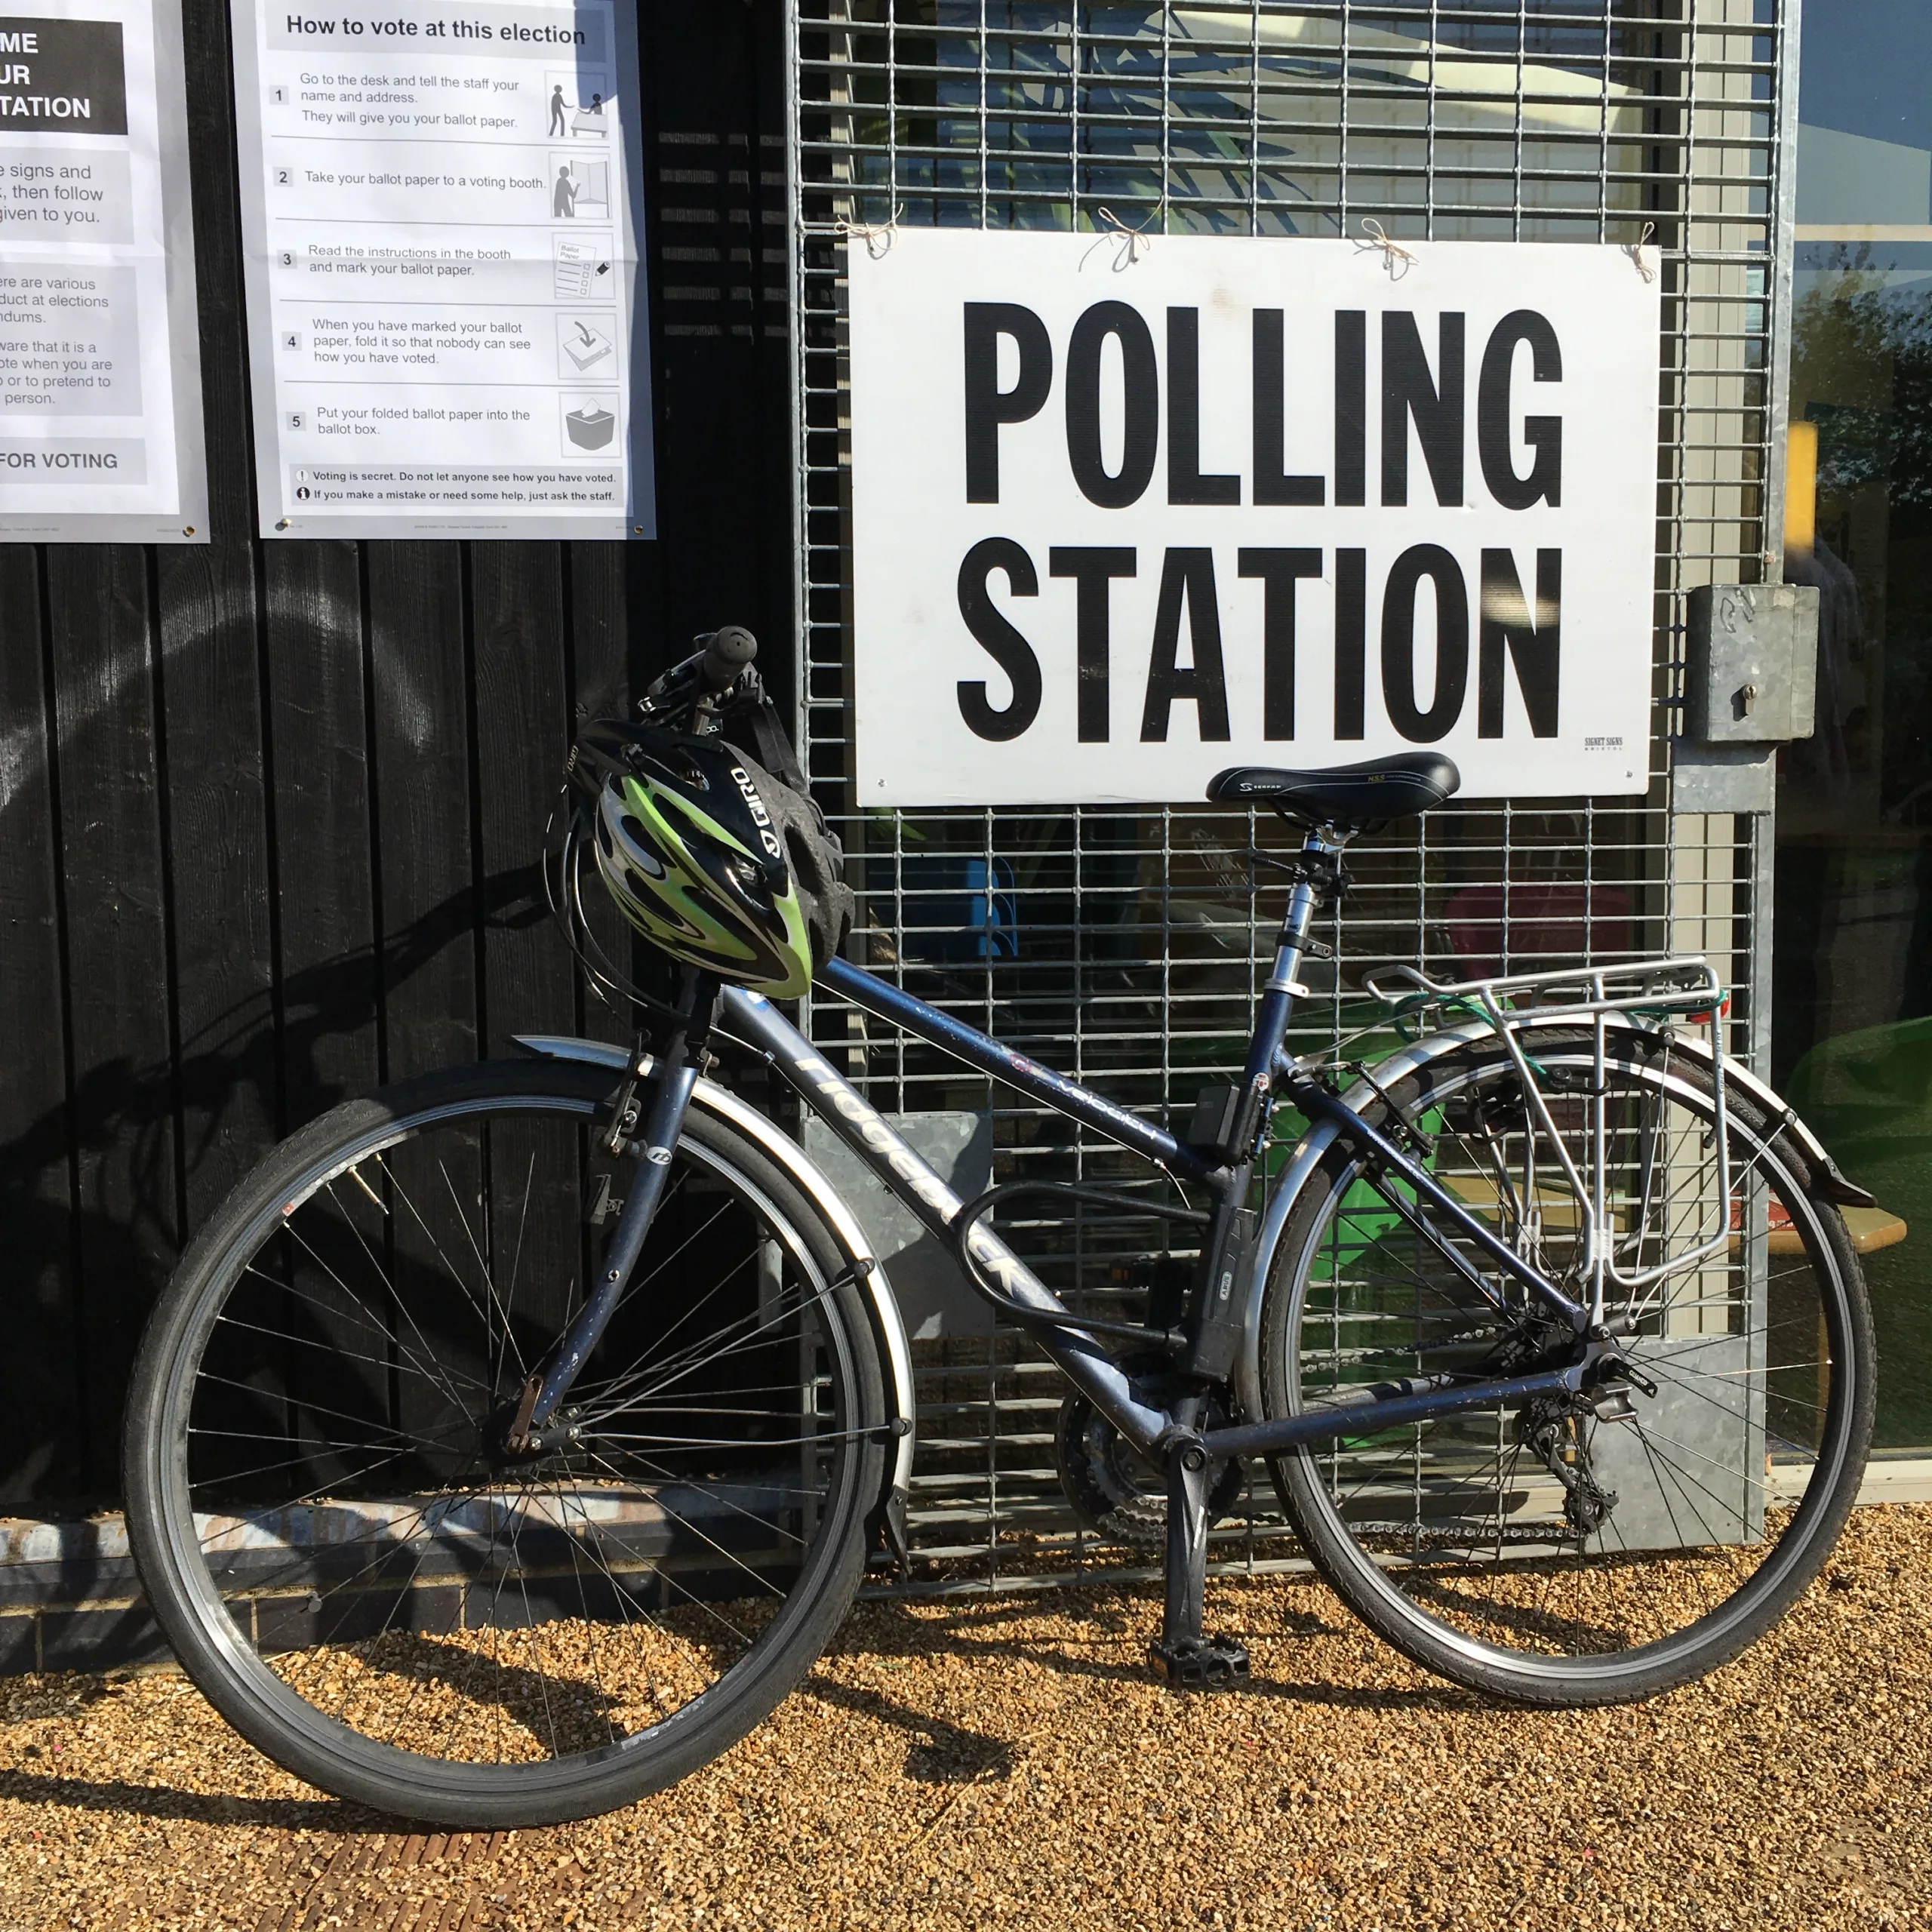 Local elections take place on 4 May for Cambridge City Council, East Cambridgeshire District Council, Fenland District Council and Peterborough City Council.